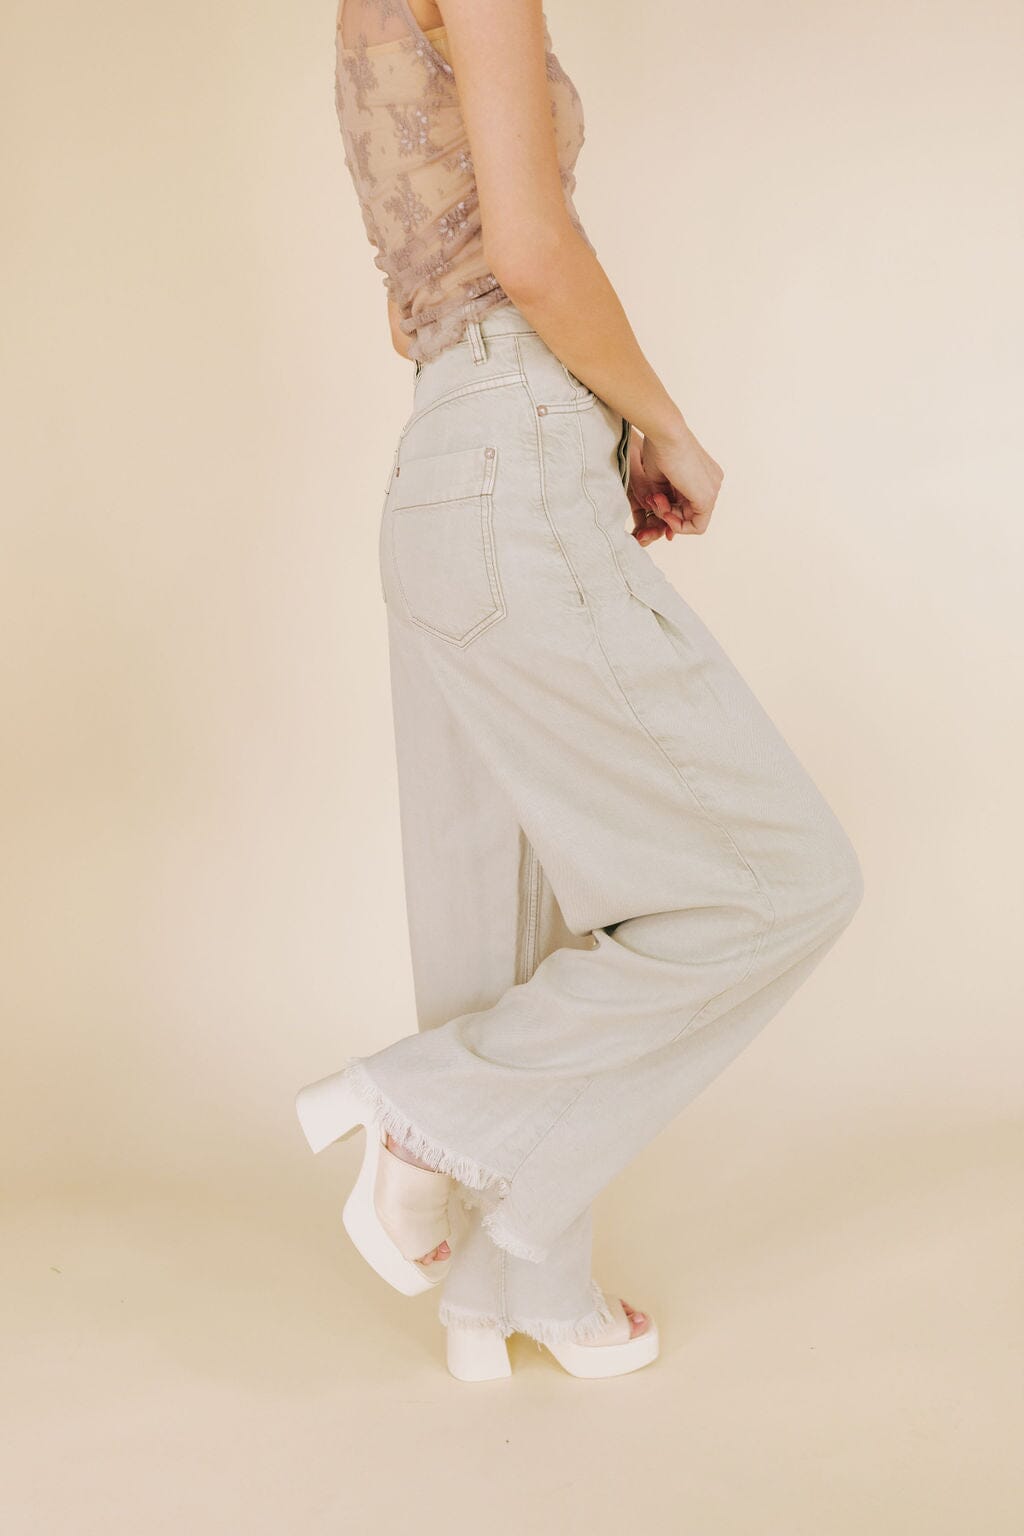 FREE PEOPLE - Old West Slouchy Jeans - 3 Colors!